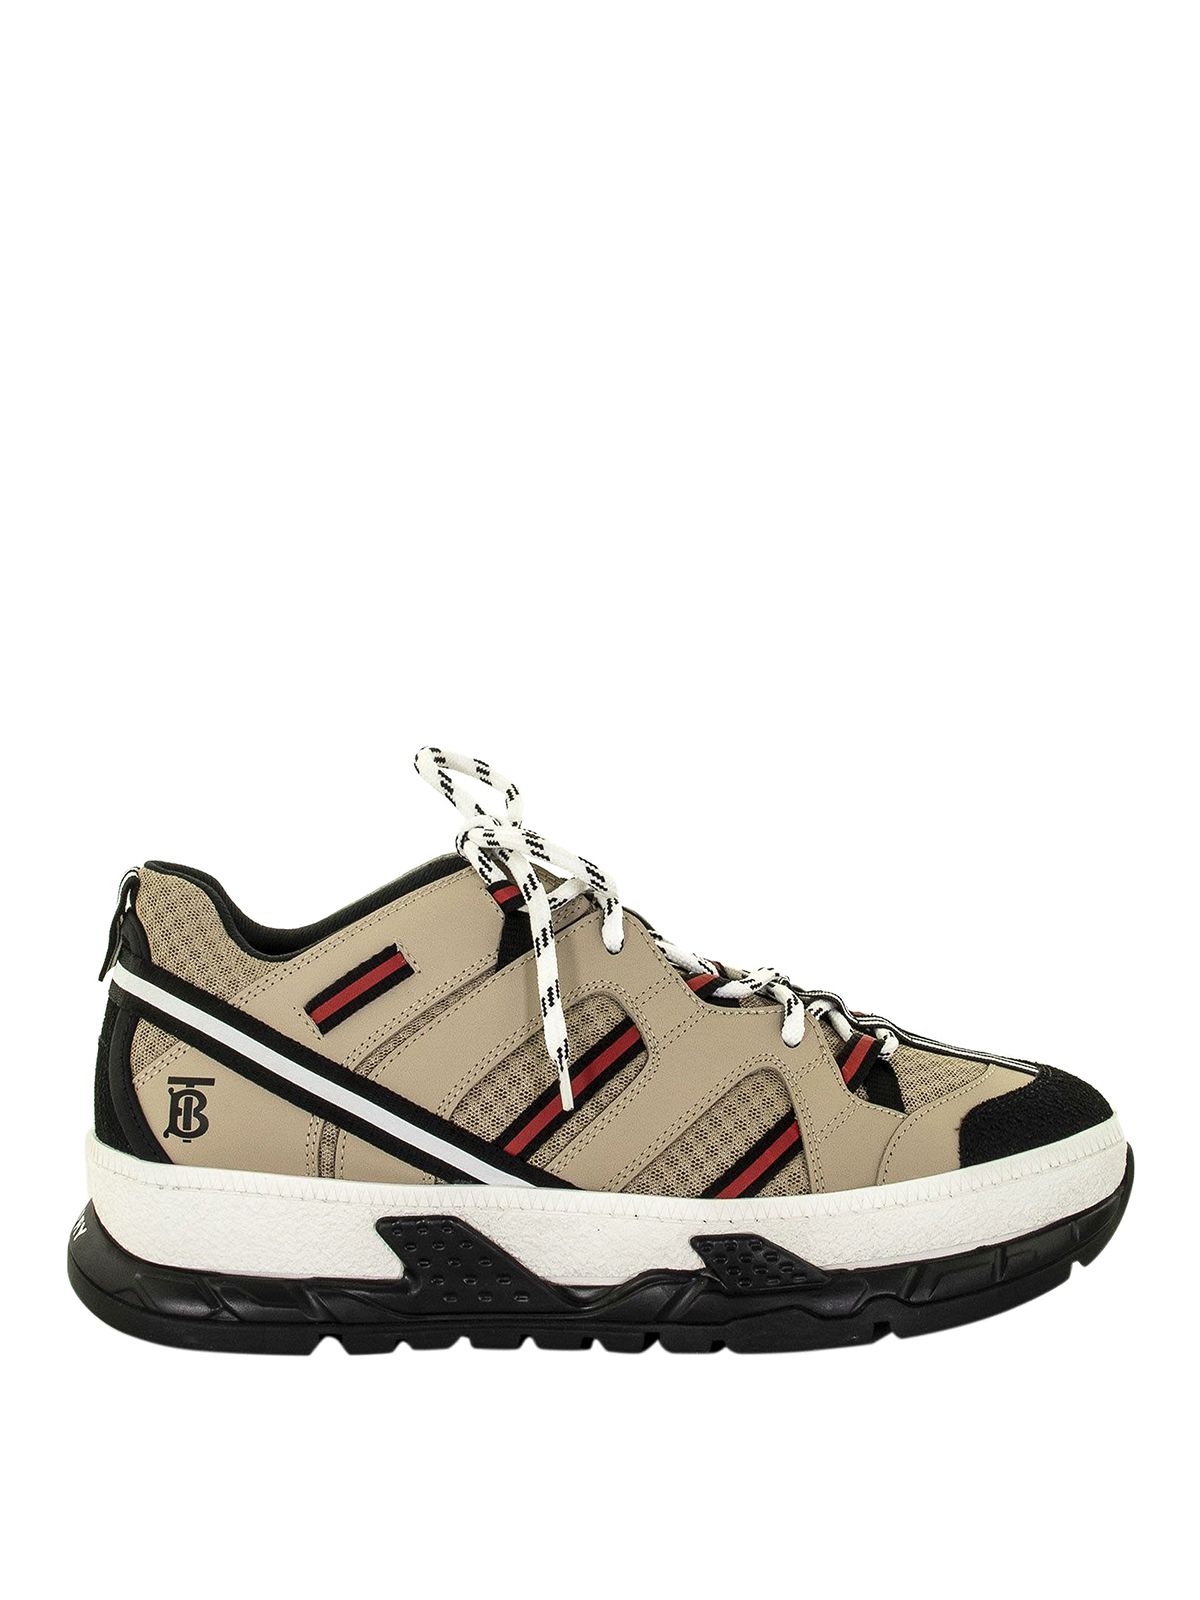 burberry trainers